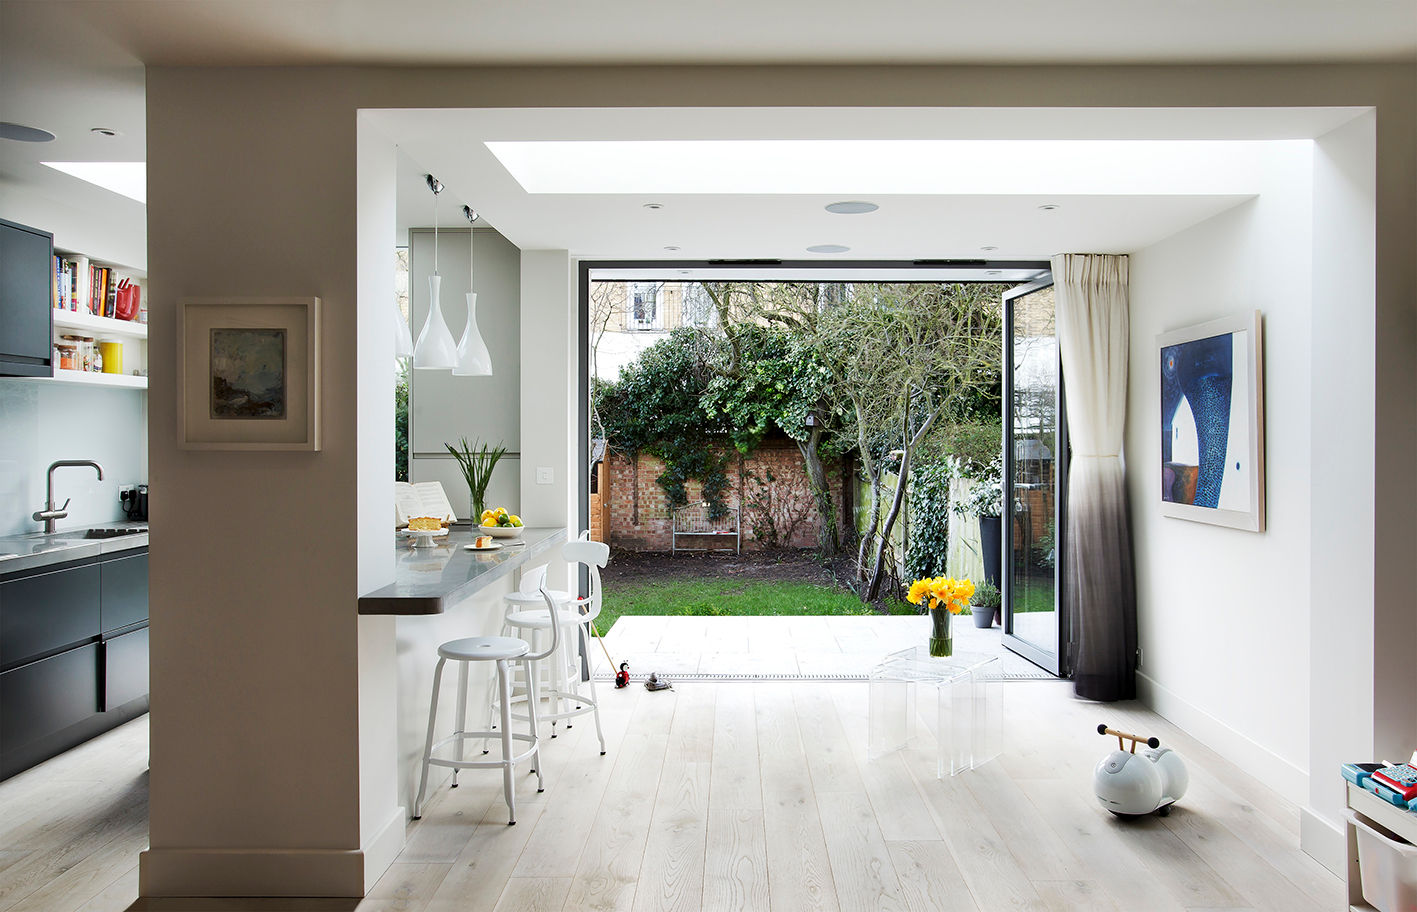 inside/outside homify Dining room london,extension,architecture,glass,kitchen,concrete